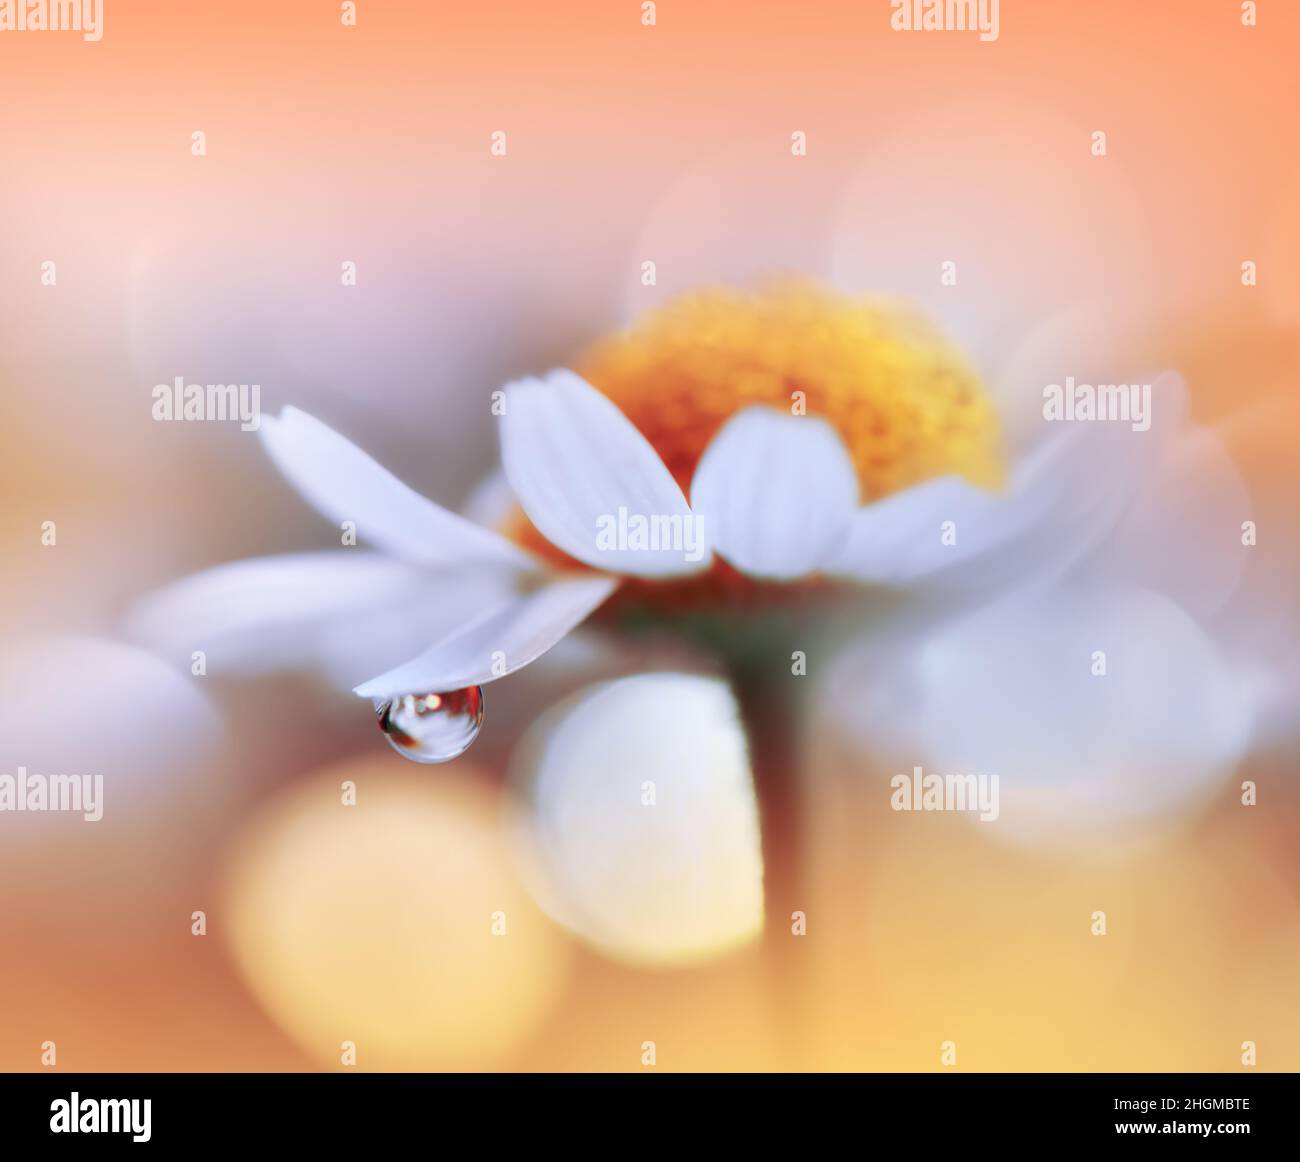 Beautiful Macro Photo.Dream Flowers.Border Art Design.Magic Light.Close up Photography.Conceptual Abstract Image.Yellow and Orange Background.Drops. Stock Photo